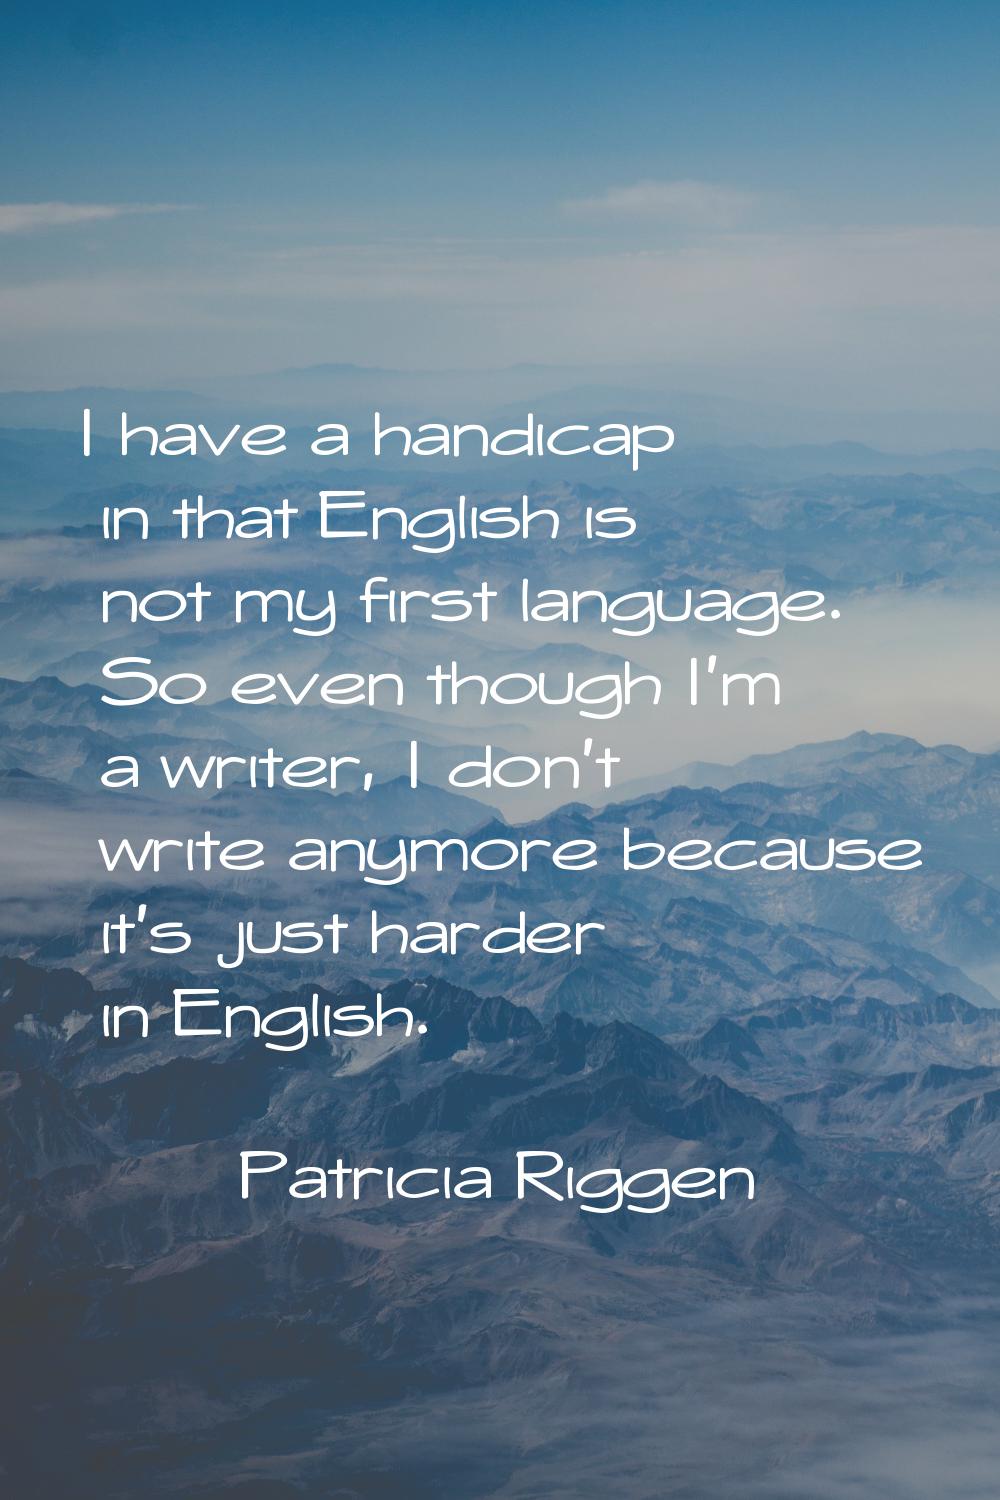 I have a handicap in that English is not my first language. So even though I'm a writer, I don't wr